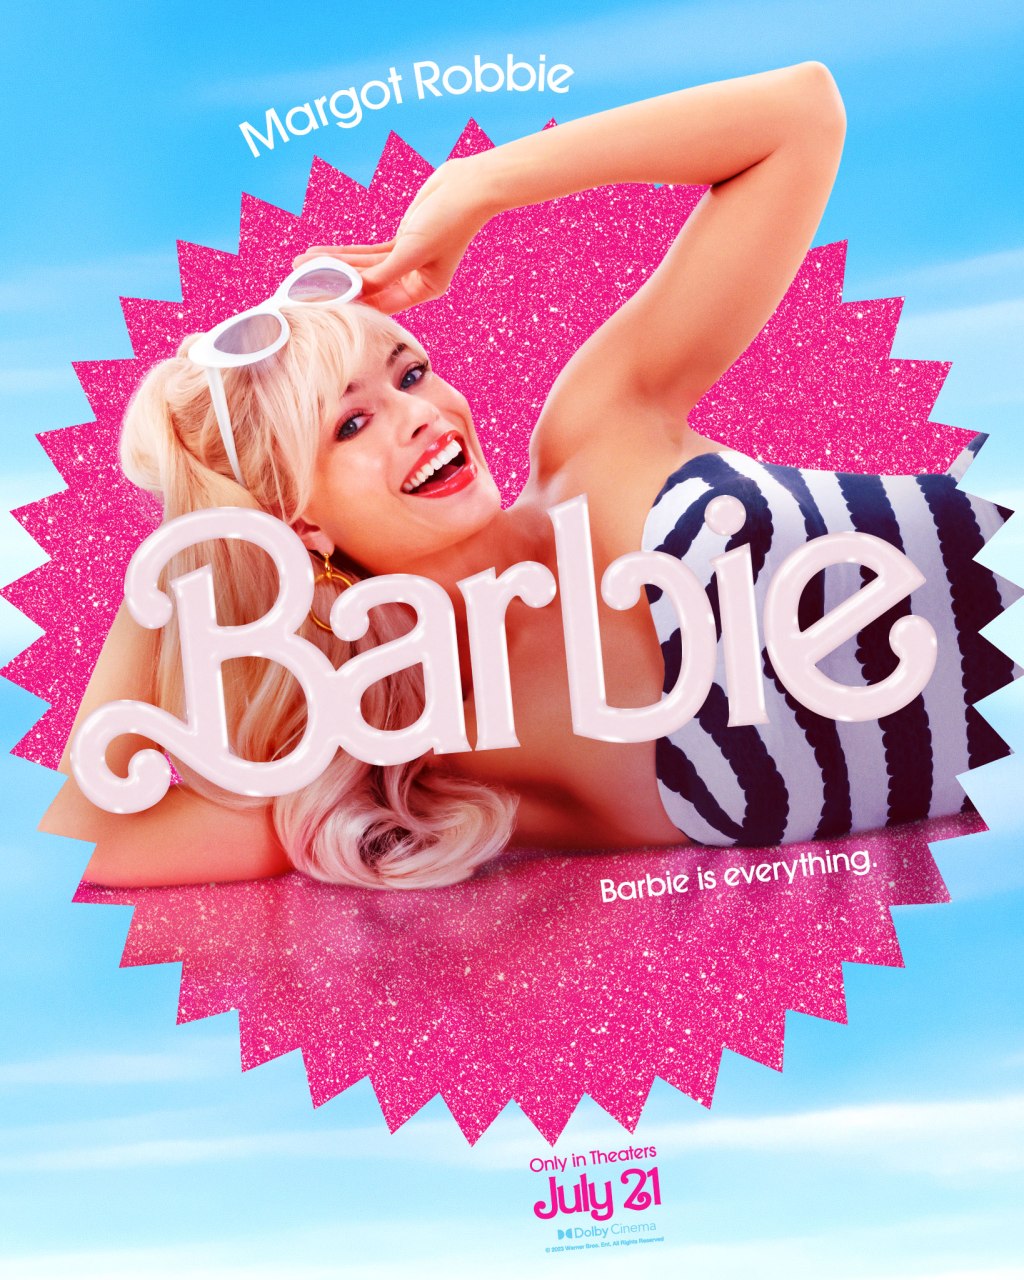 New Barbie trailer drops as excitement builds for movie -